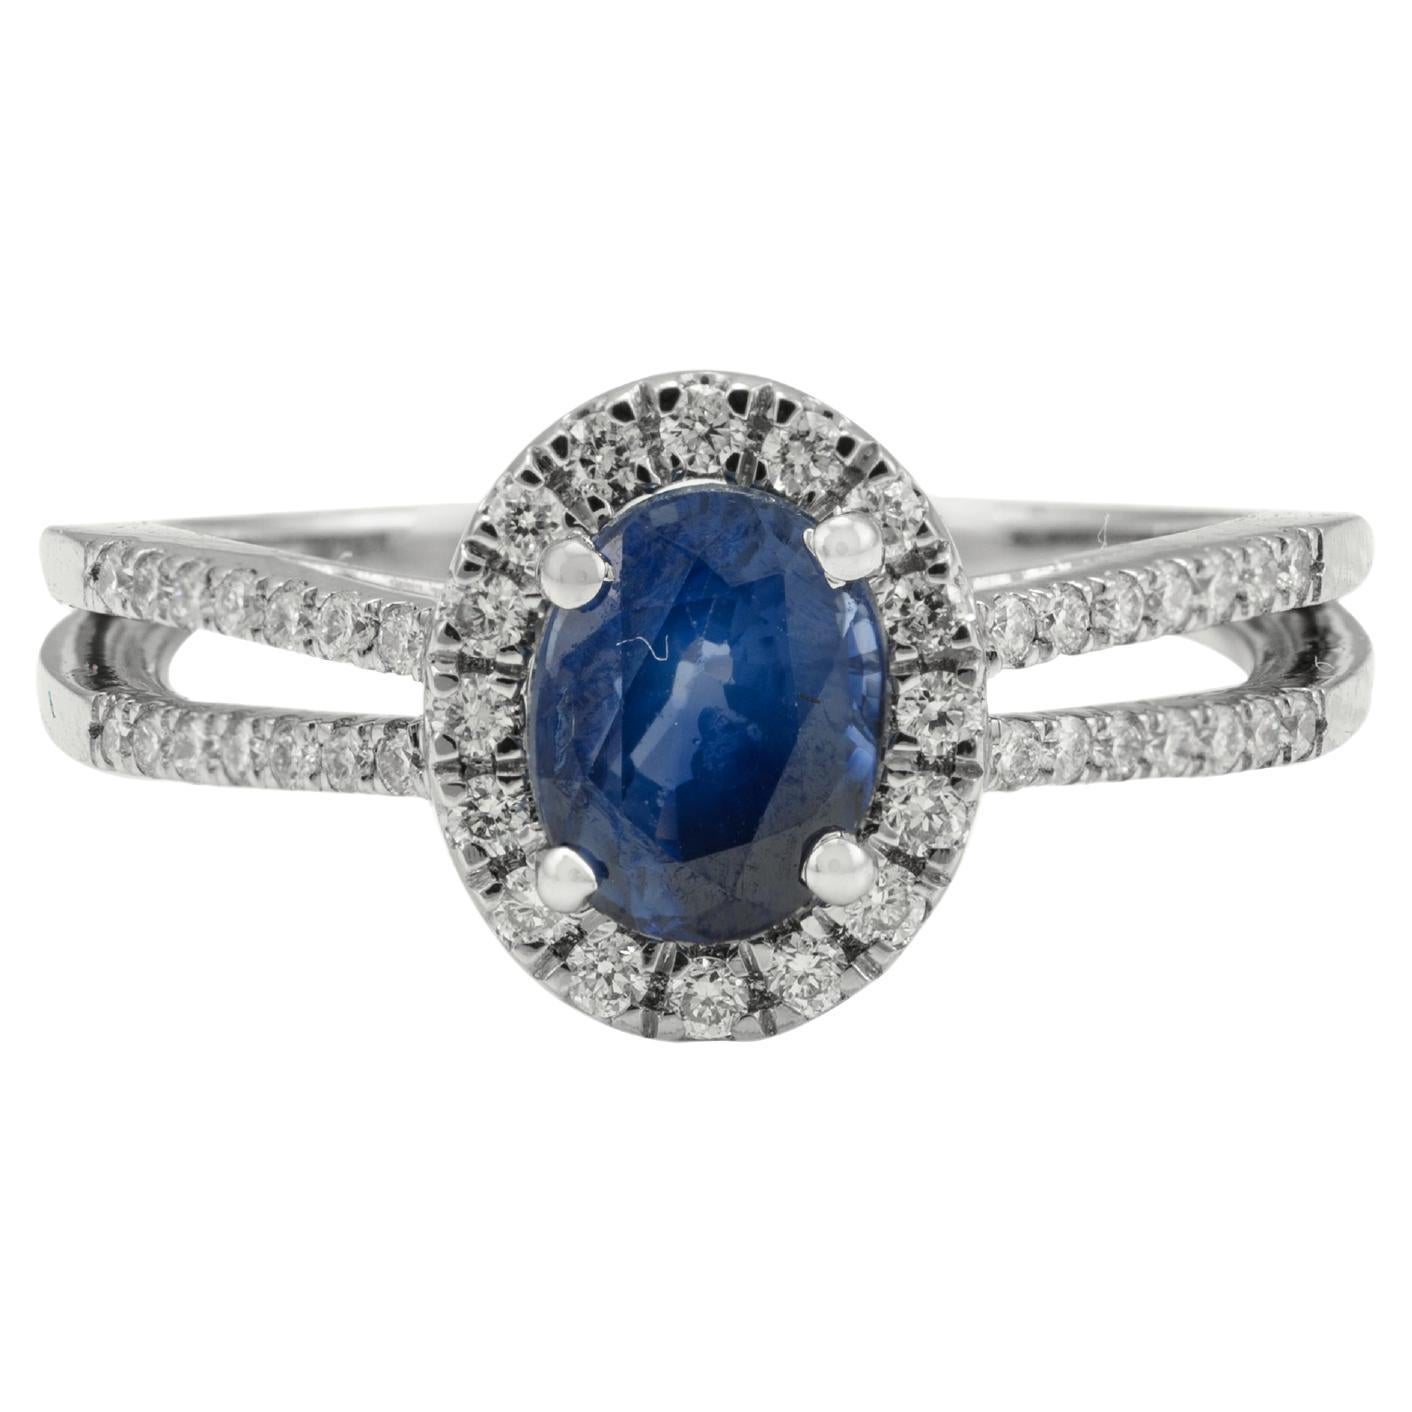 For Sale:  18k Solid White Gold Certified Blue Sapphire and Diamond Engagement Ring